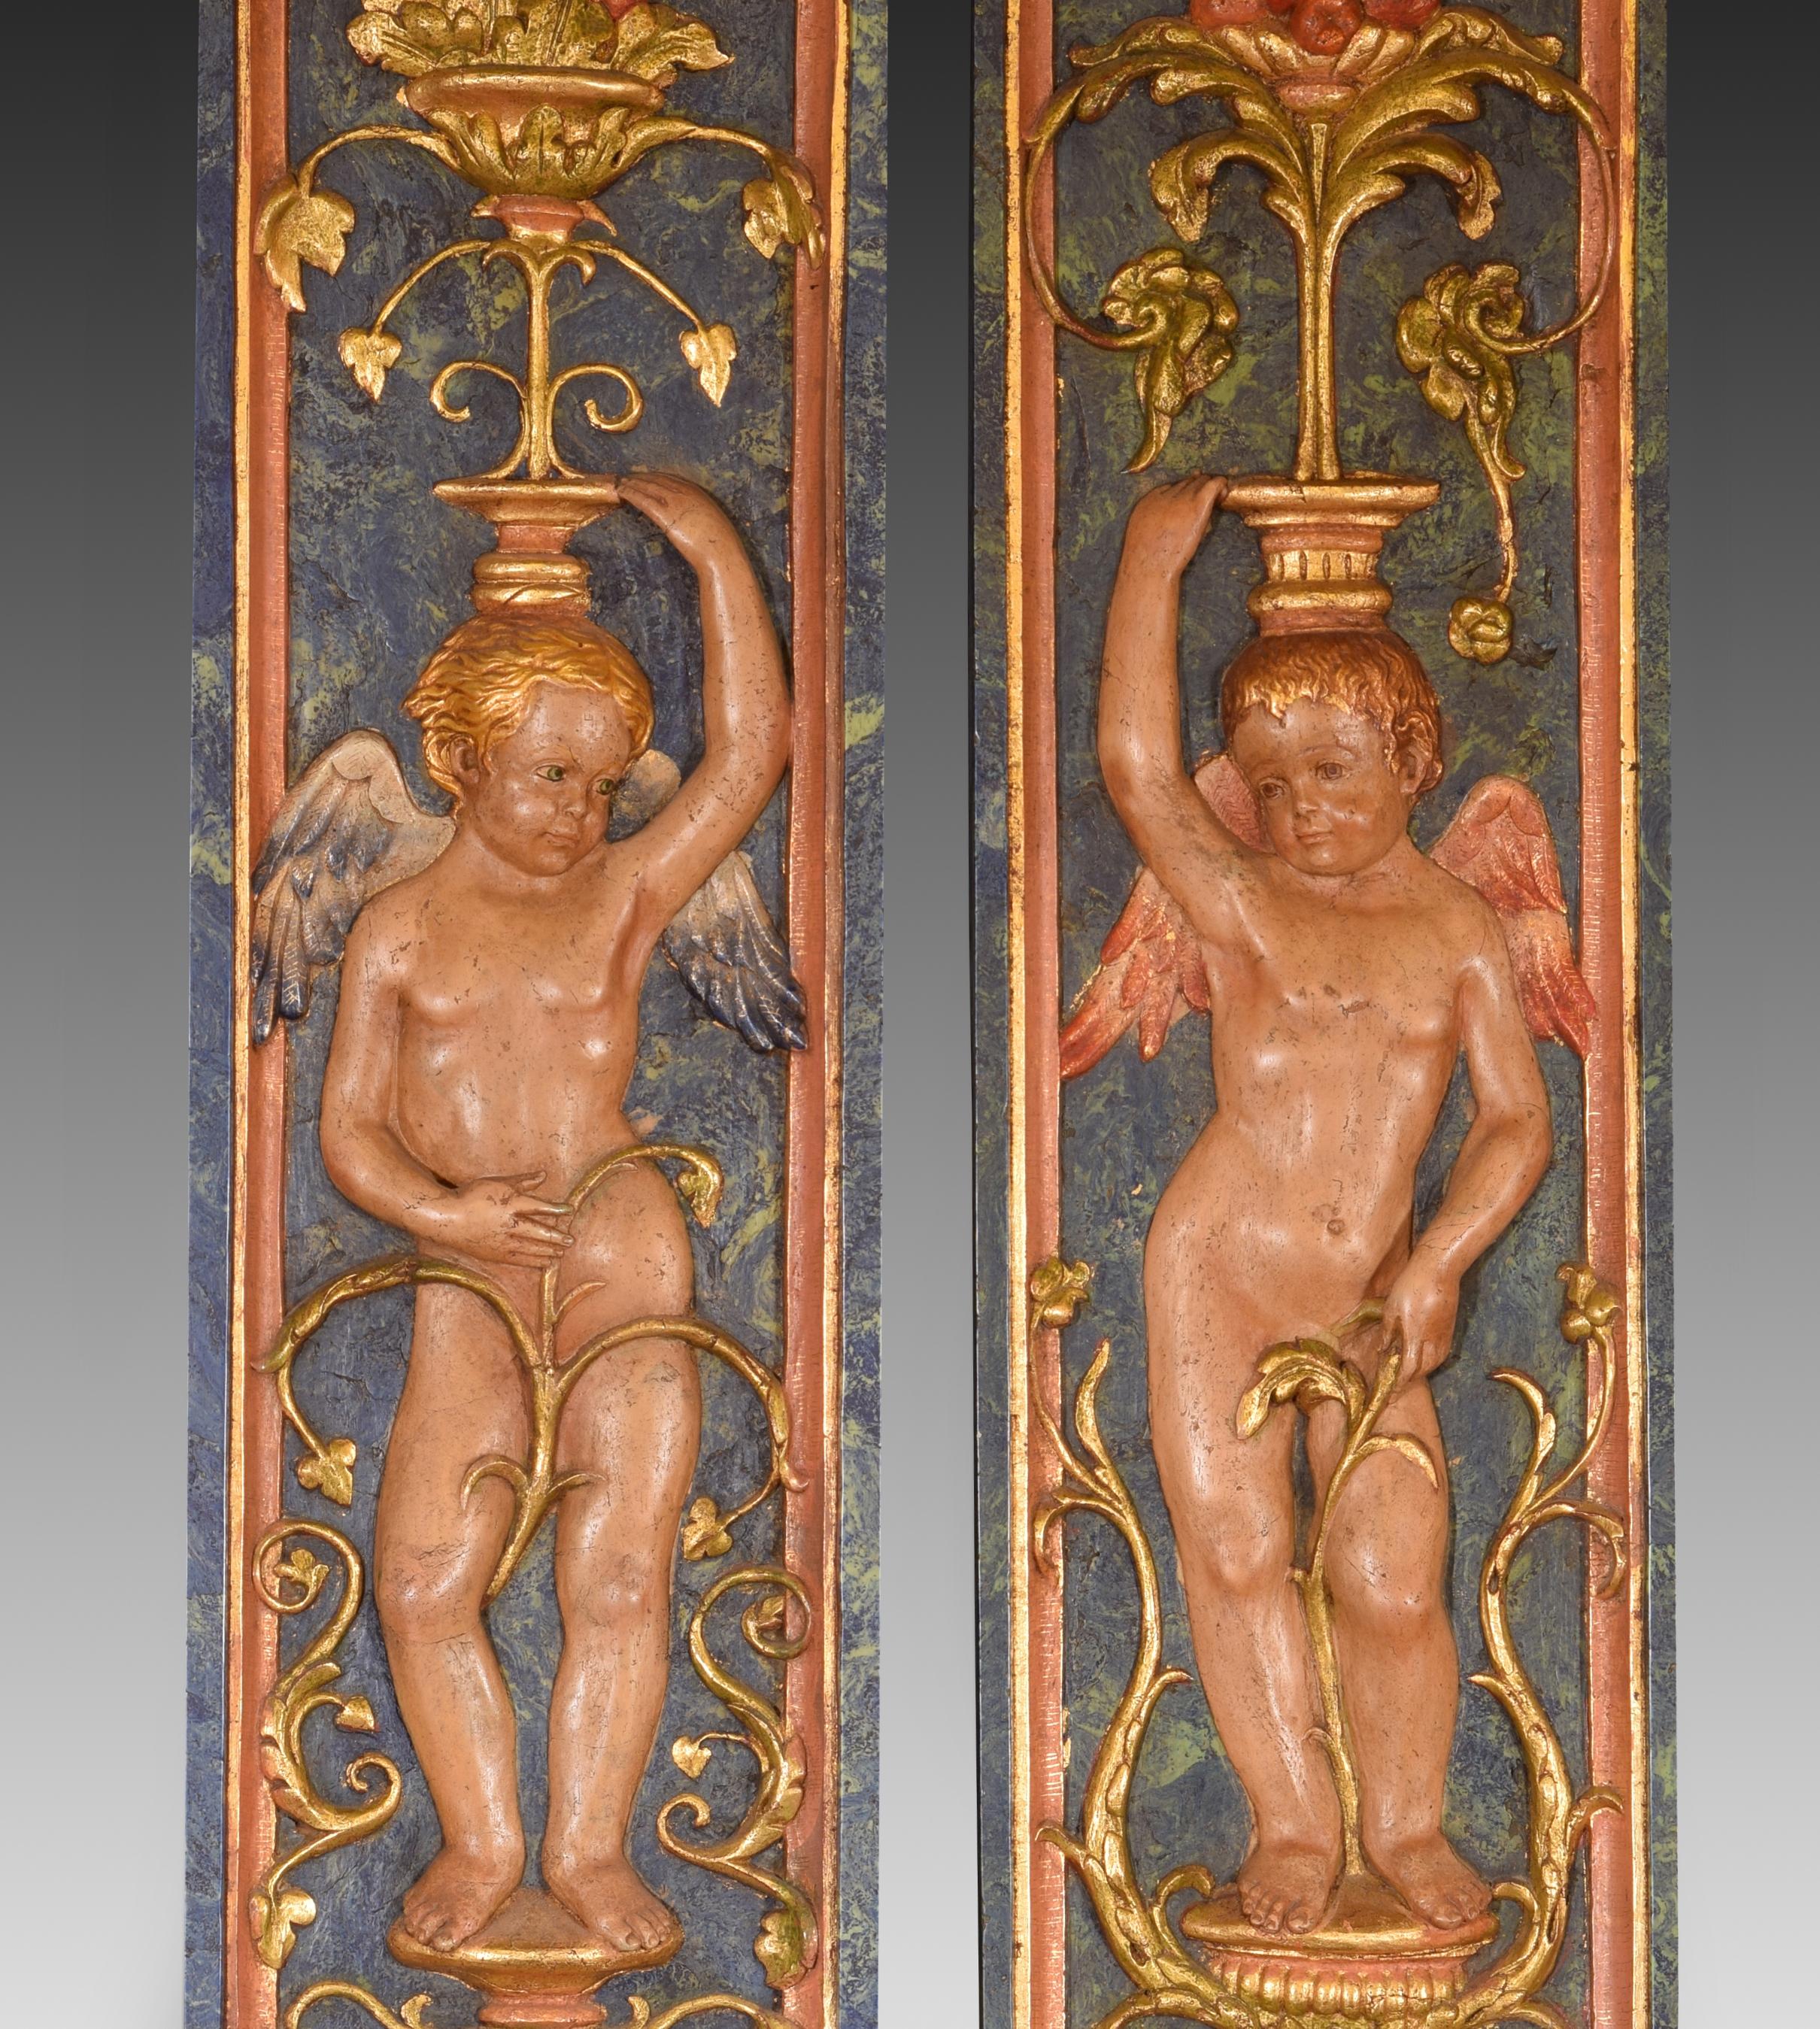 Pair of putti, relief. Molded alabaster. 20th century, following Renaissance models. 
Pair of figurative reliefs made of alabaster molded with polychrome that present two winged child figures (putti or cupids), standing, holding plant elements above